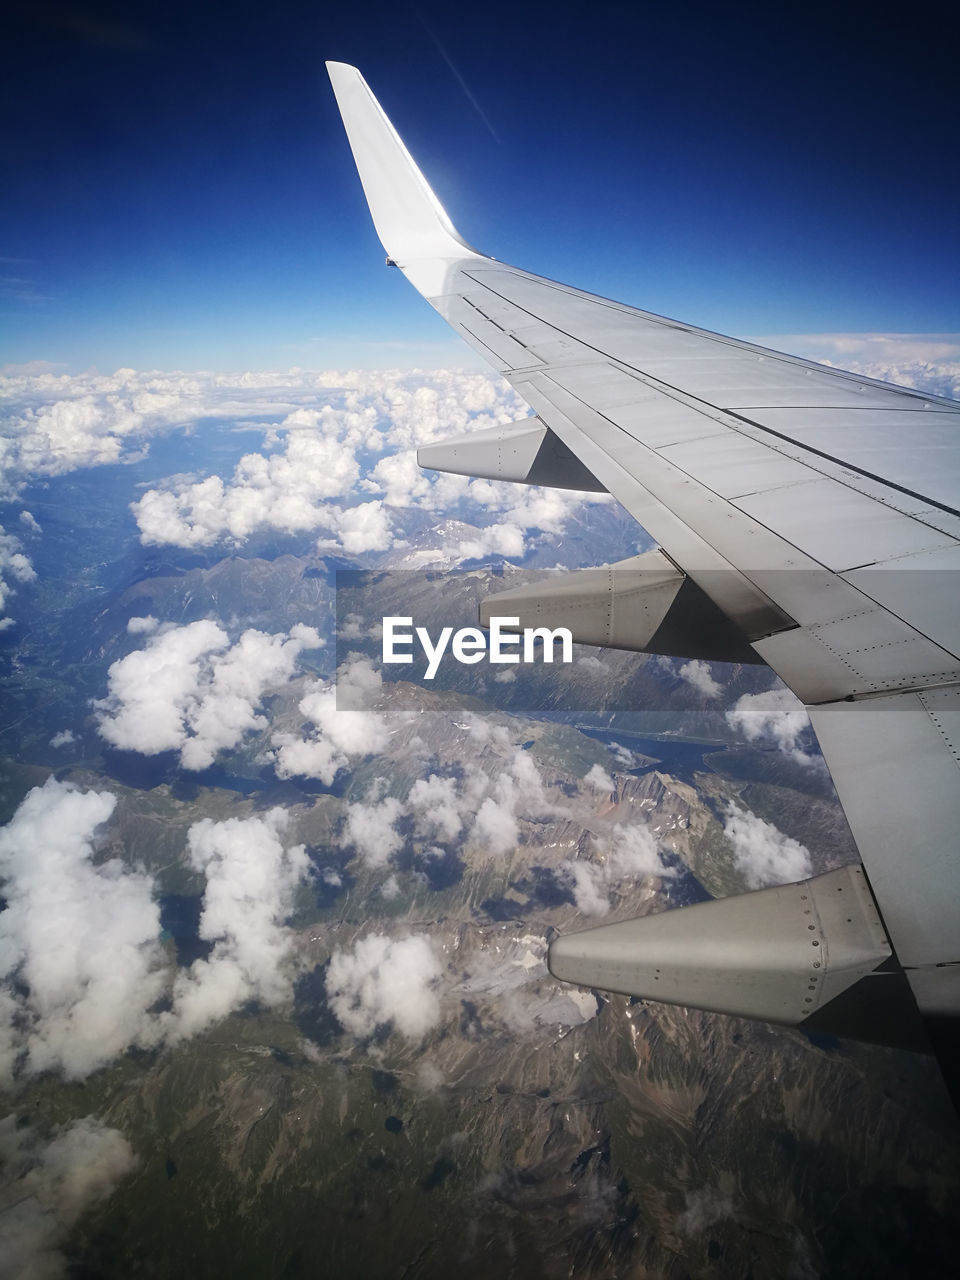 Cropped image of airplane flying over mountains against clear sky